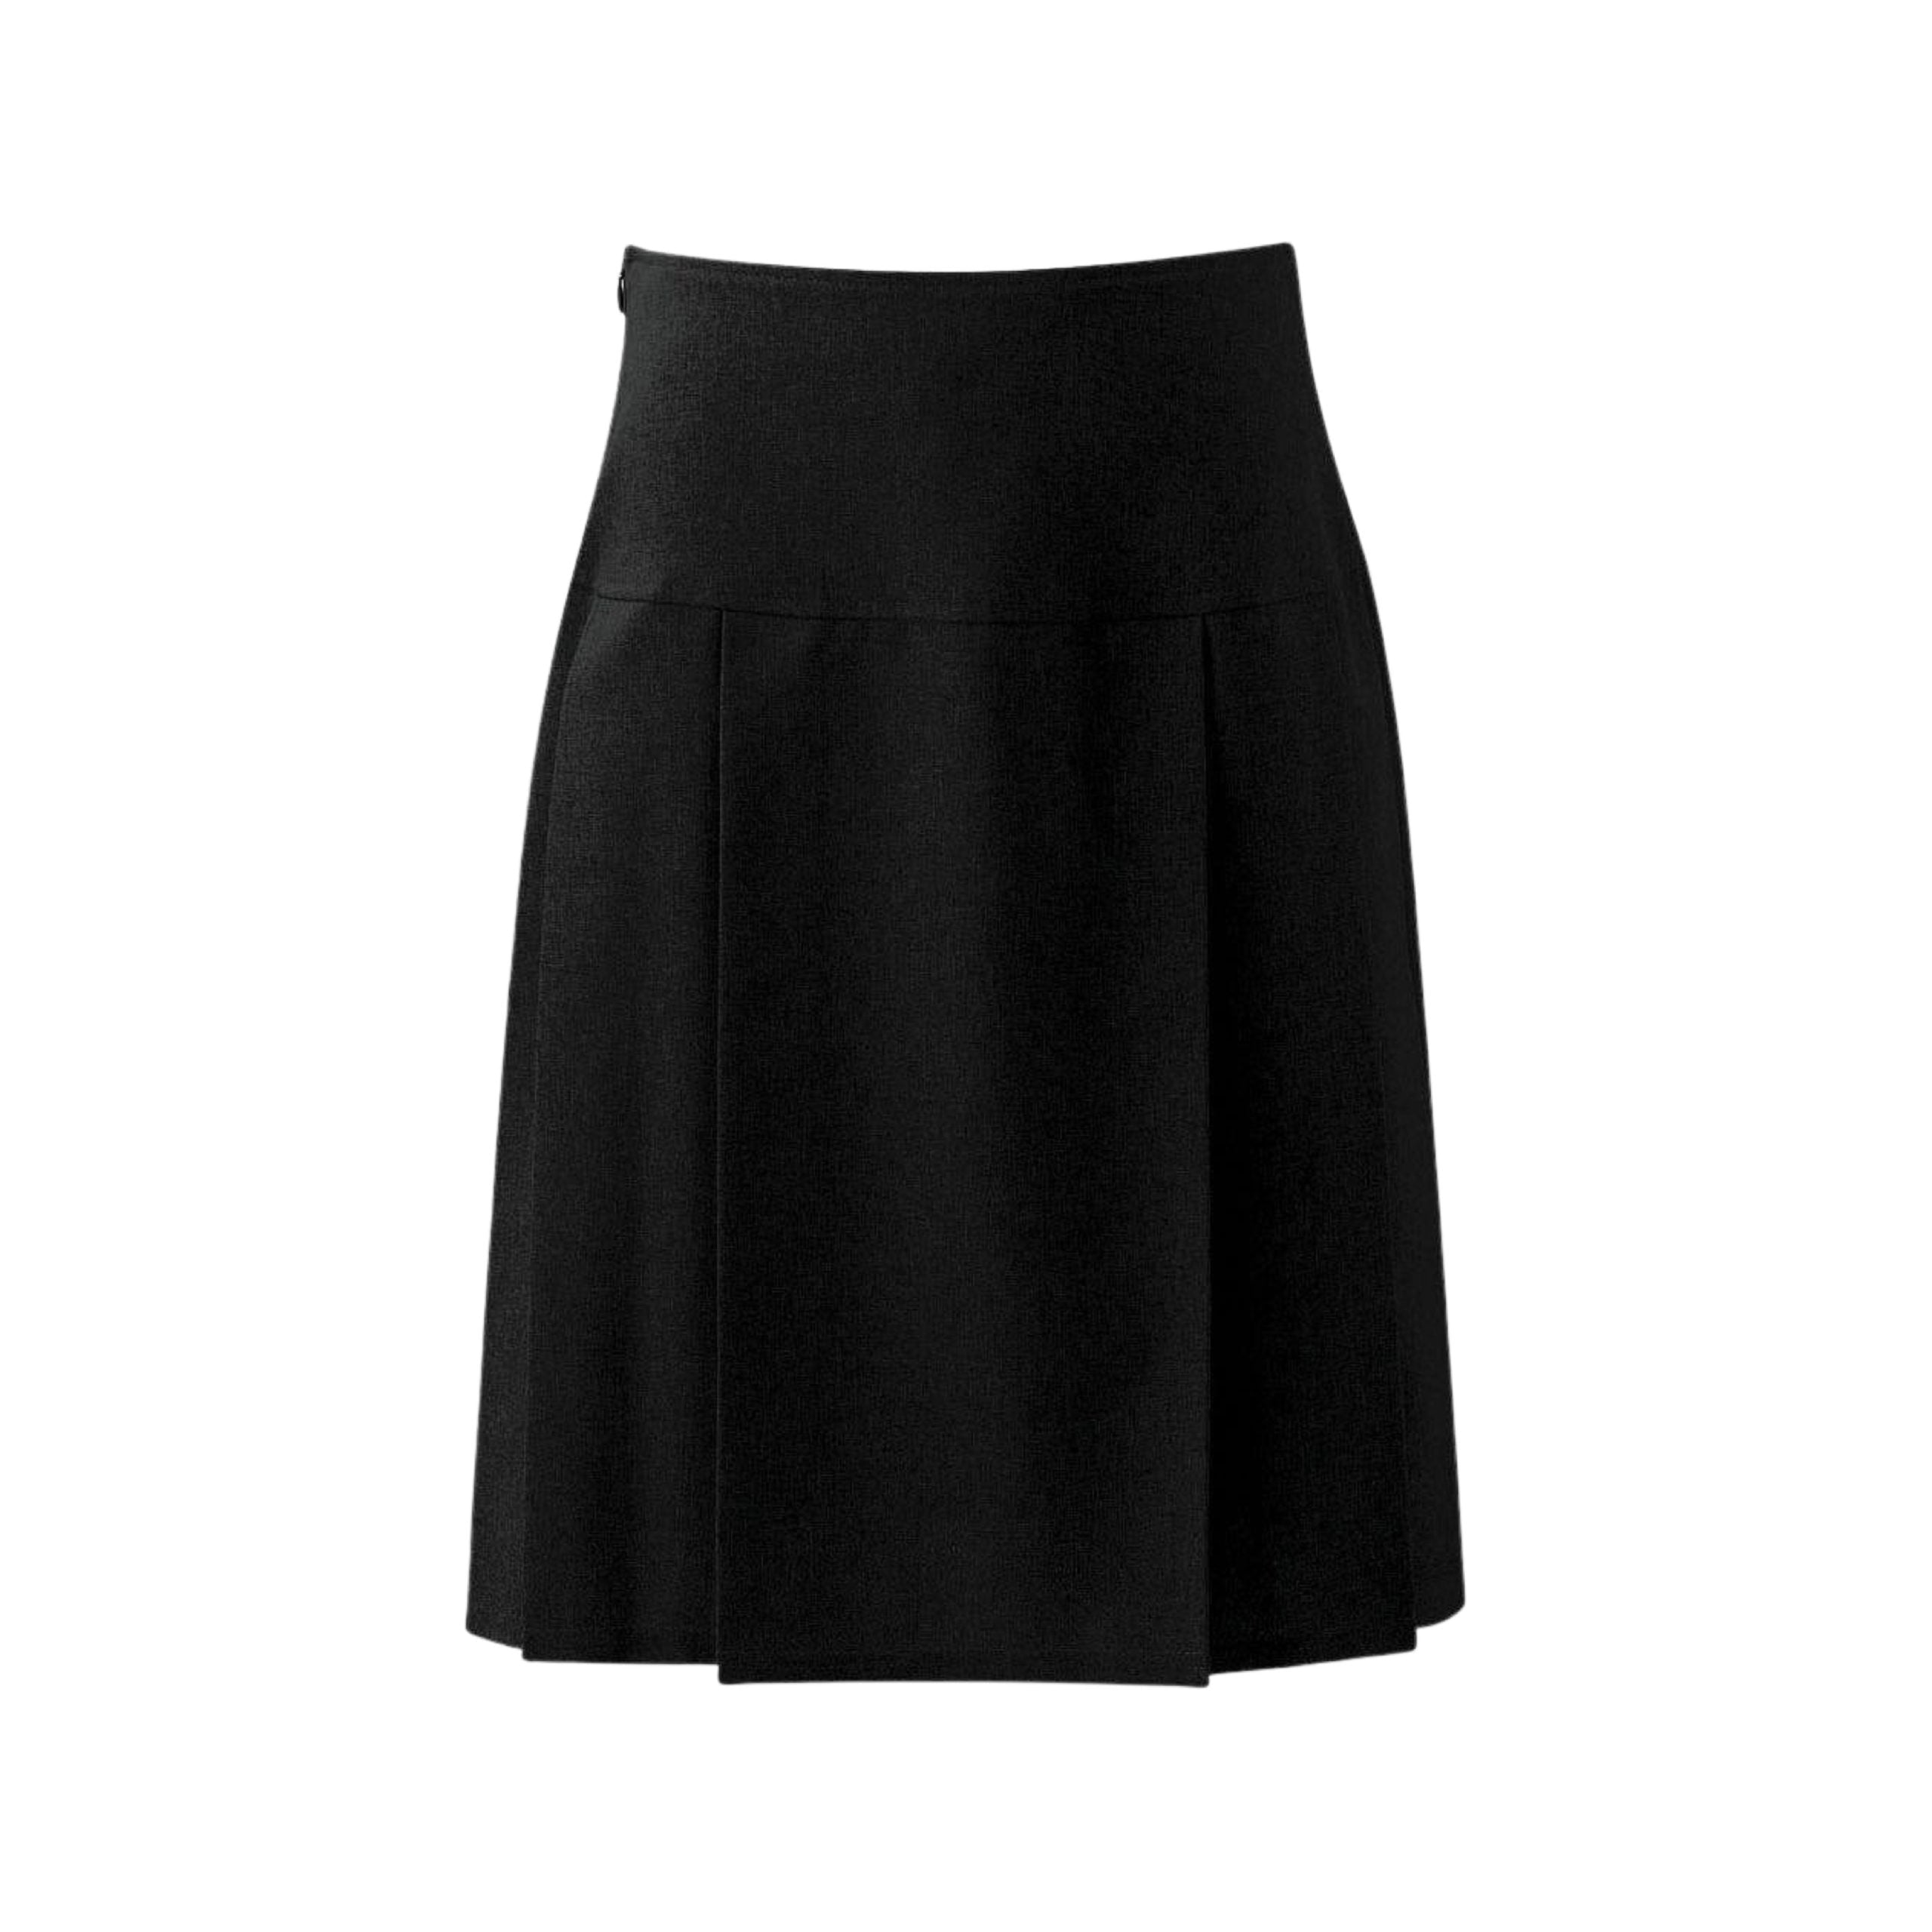 Black 3 Pleat Skirt With Zip & Button – Kitted Out Schoolwear